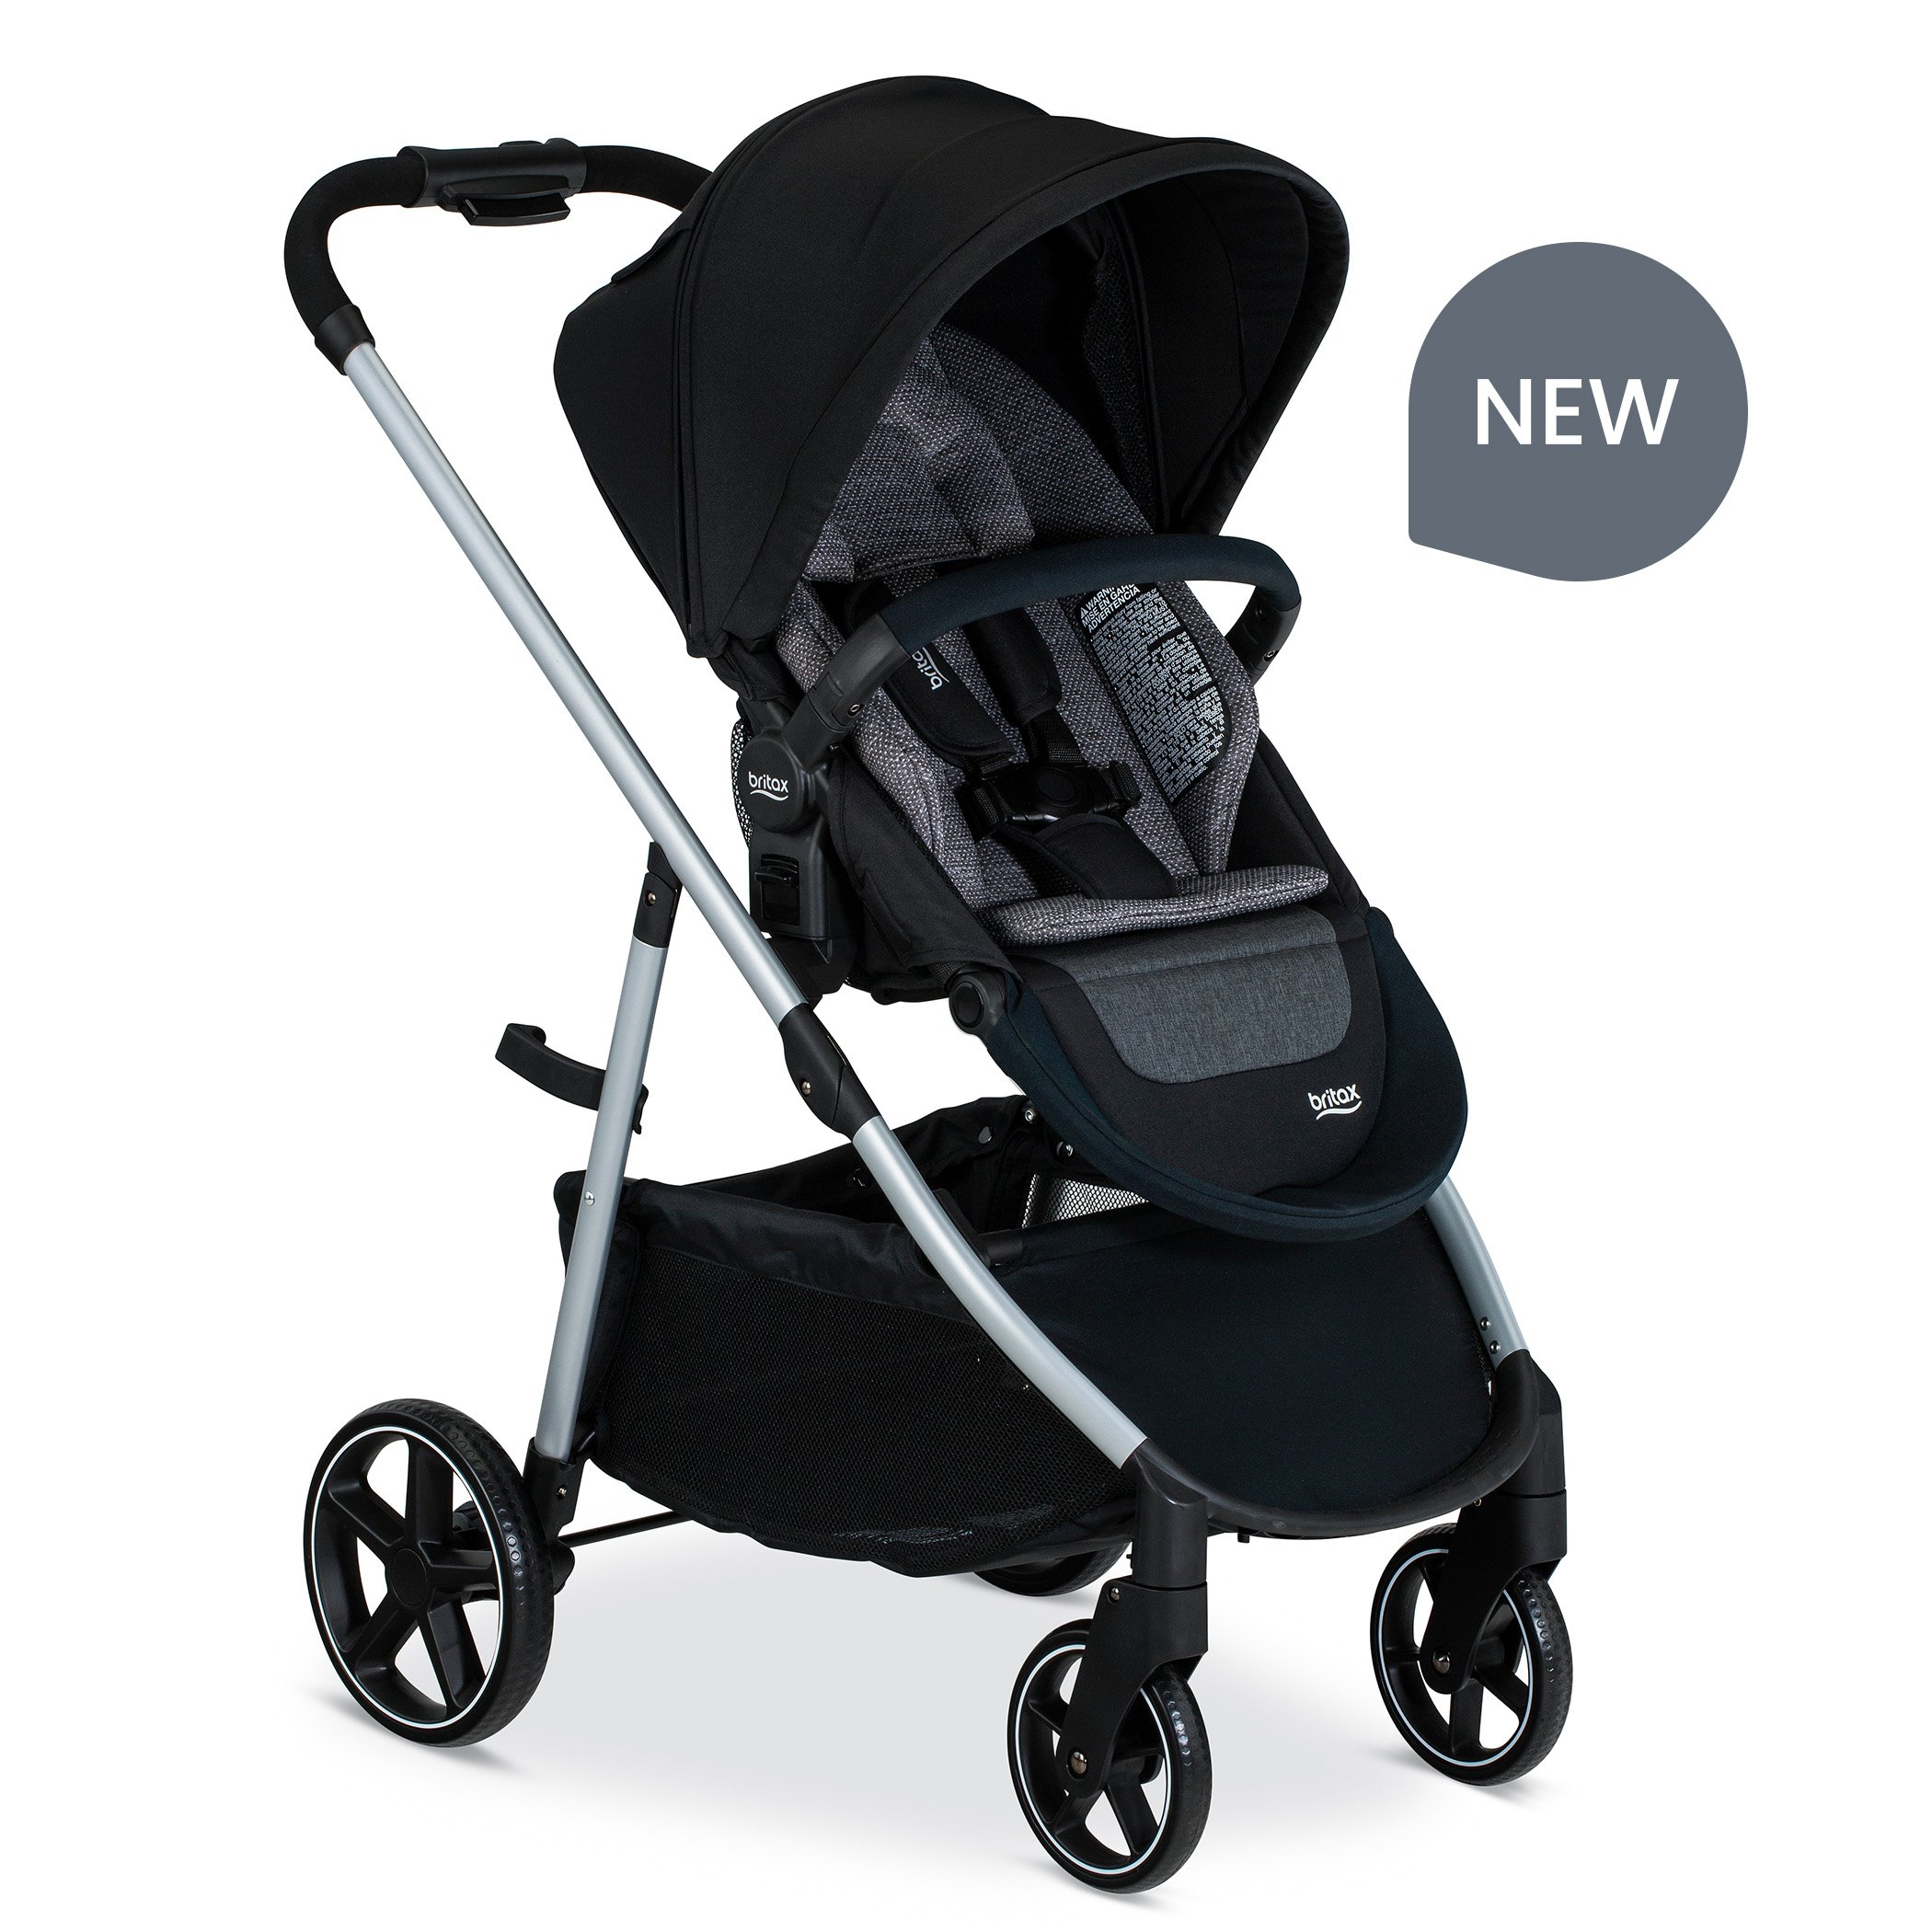 Pindot Onyx Grove Stroller with New Callout